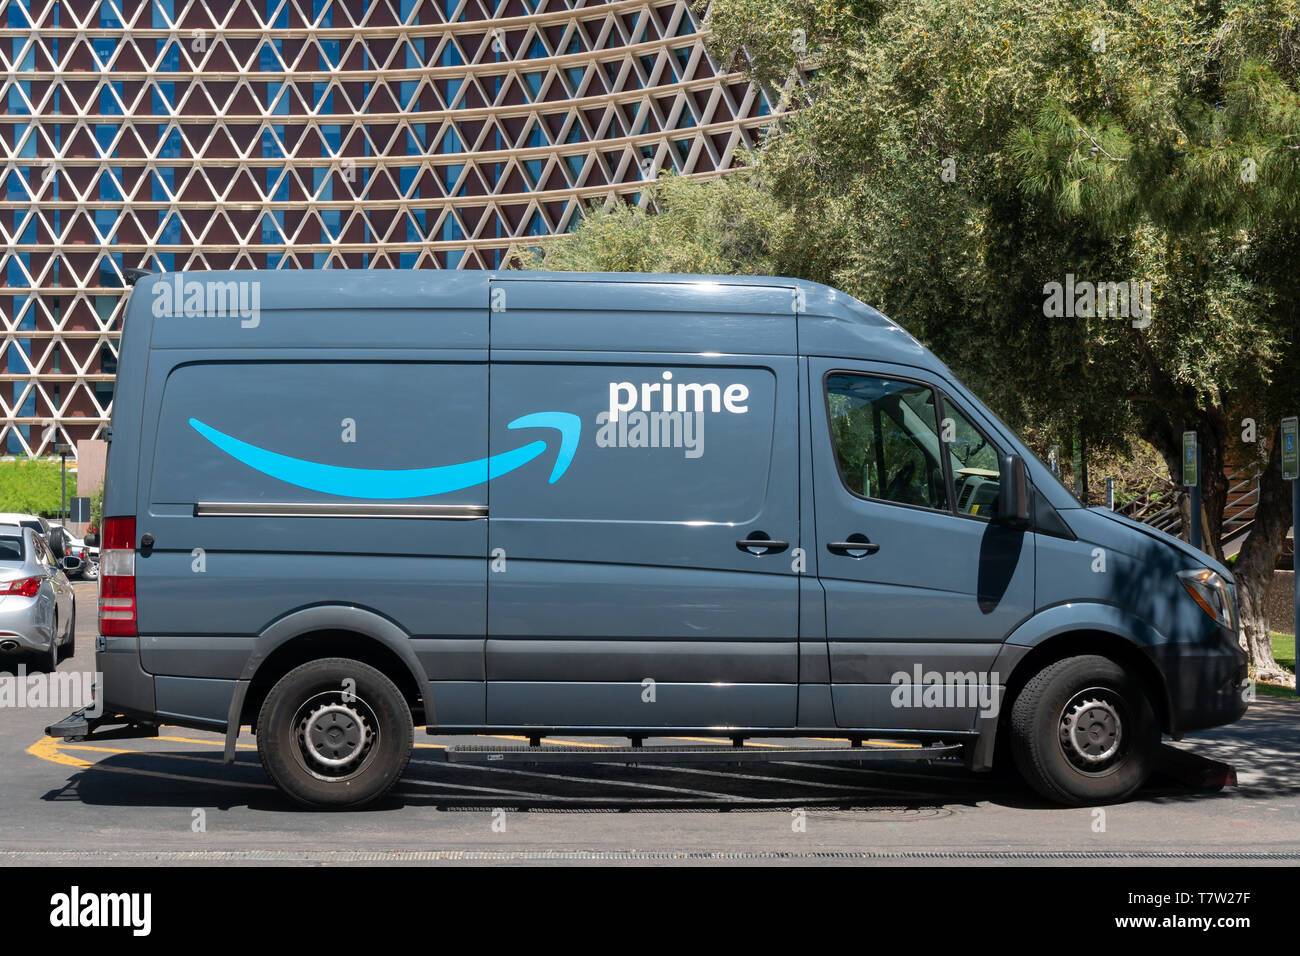 Amazon prime truck hi-res stock photography and images - Alamy